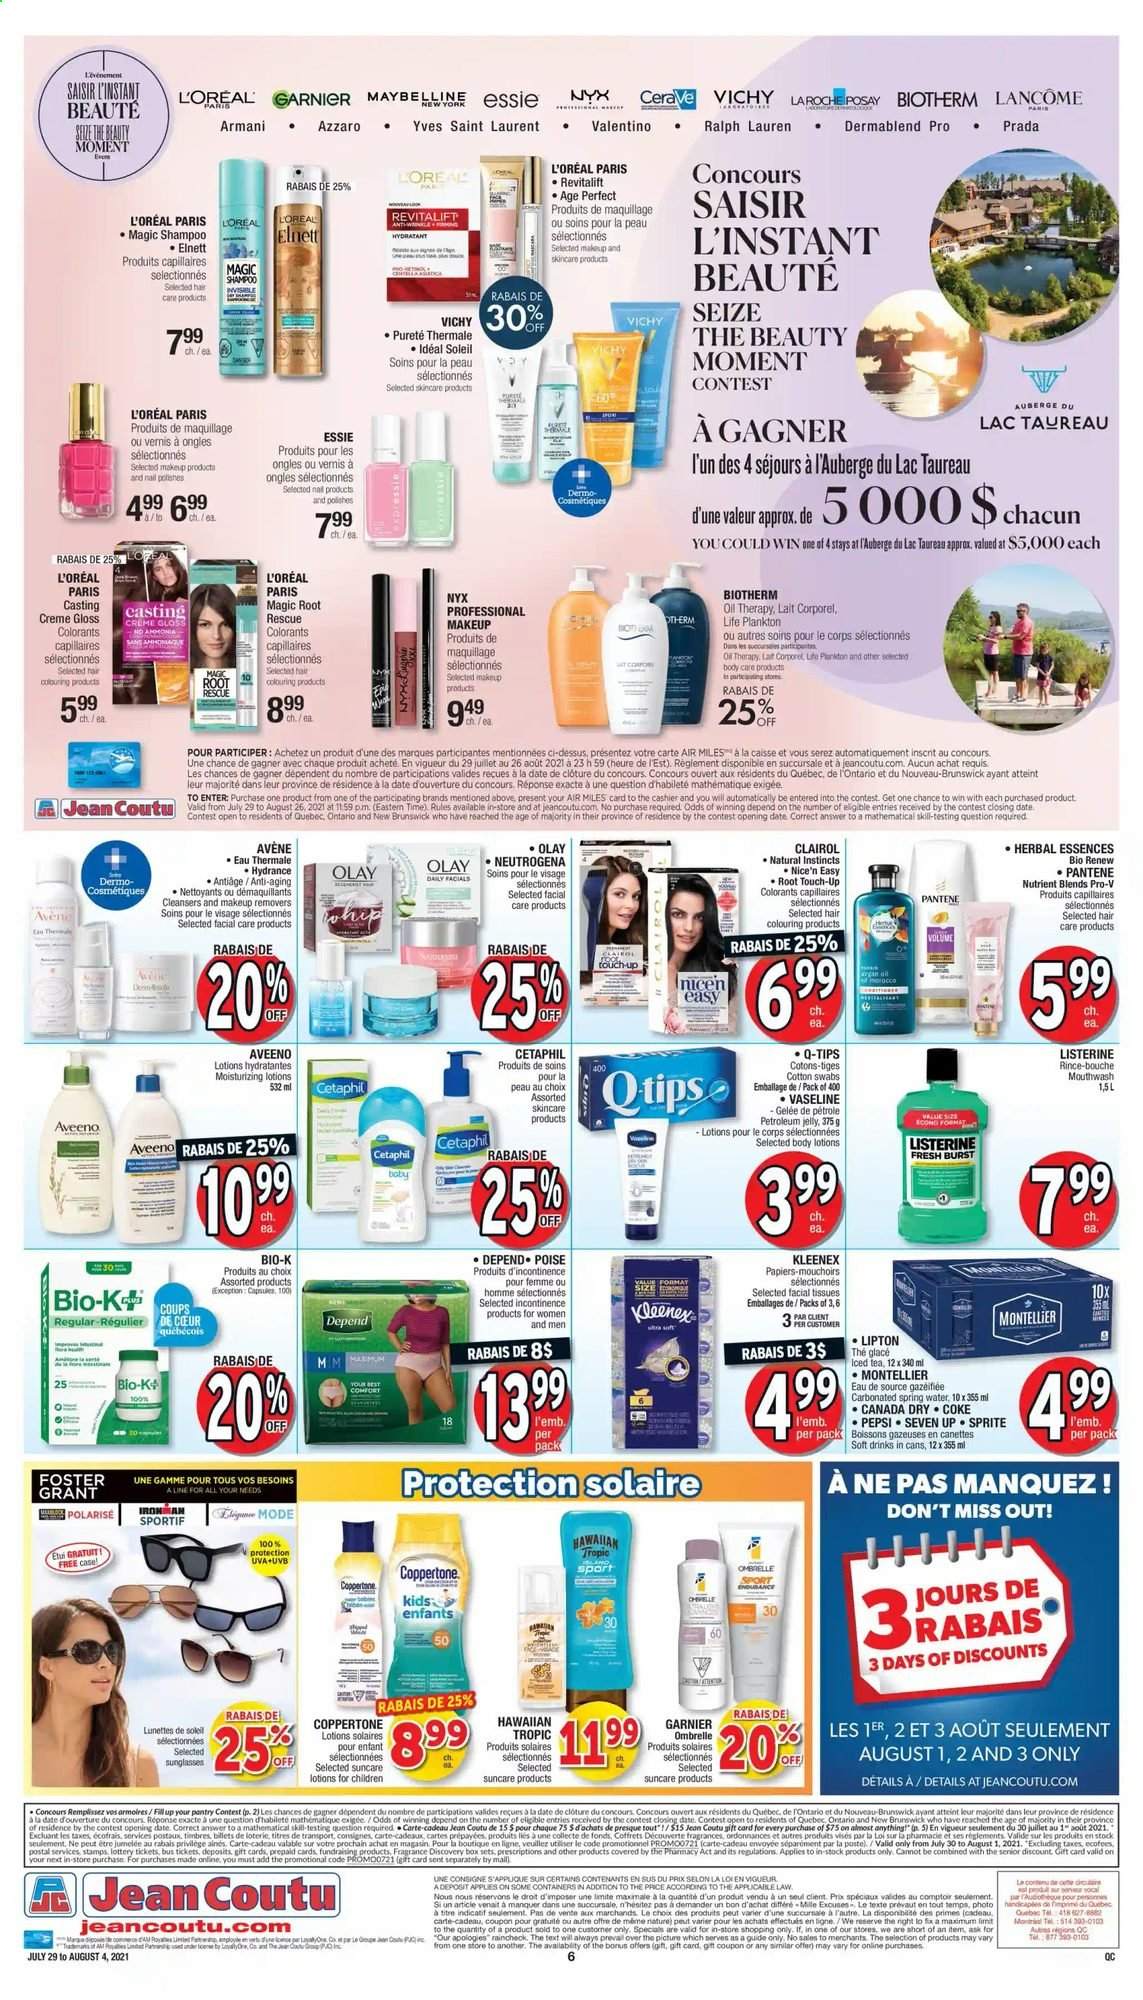 thumbnail - Jean Coutu Flyer - July 29, 2021 - August 04, 2021 - Sales products - oil, Canada Dry, Coca-Cola, Sprite, Pepsi, ice tea, soft drink, 7UP, spring water, Aveeno, petroleum jelly, Kleenex, tissues, Vichy, Vaseline, mouthwash, CeraVe, facial tissues, L’Oréal, Lancôme, Olay, NYX Cosmetics, Root Touch-Up, Clairol, Herbal Essences, fragrance, Ralph Lauren, Prada, Yves Saint Laurent, makeup, sunglasses, Garnier, Listerine, Neutrogena, shampoo, Pantene. Page 9.